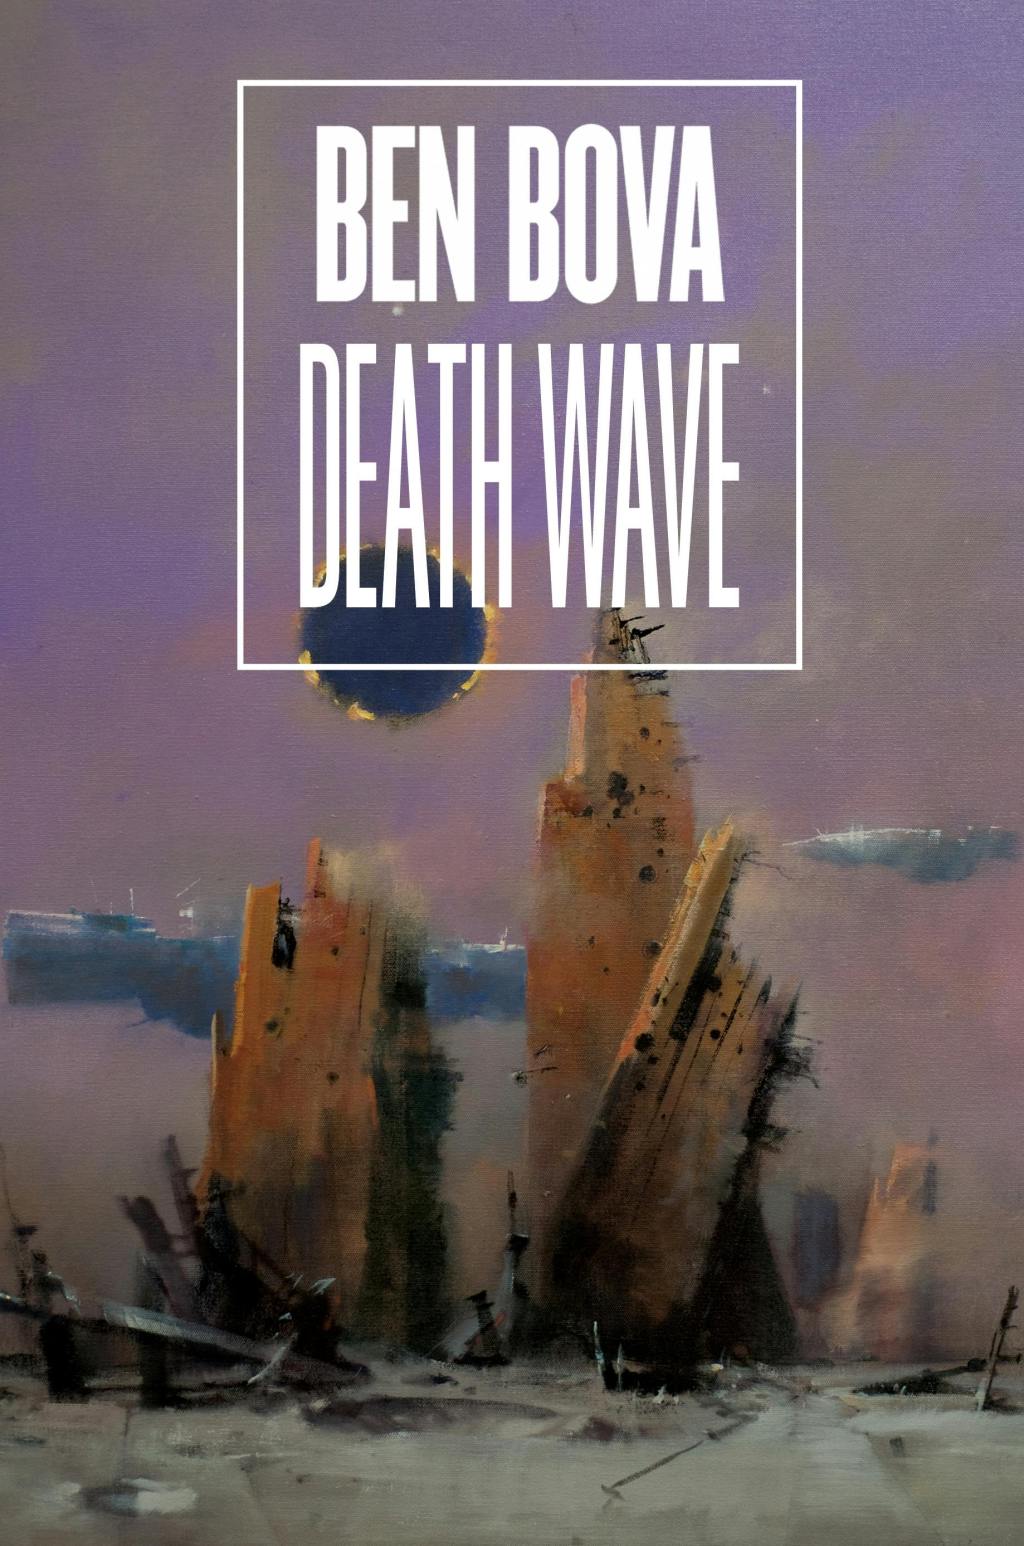 BOOK REVIEW: Death Wave, by Ben Bova